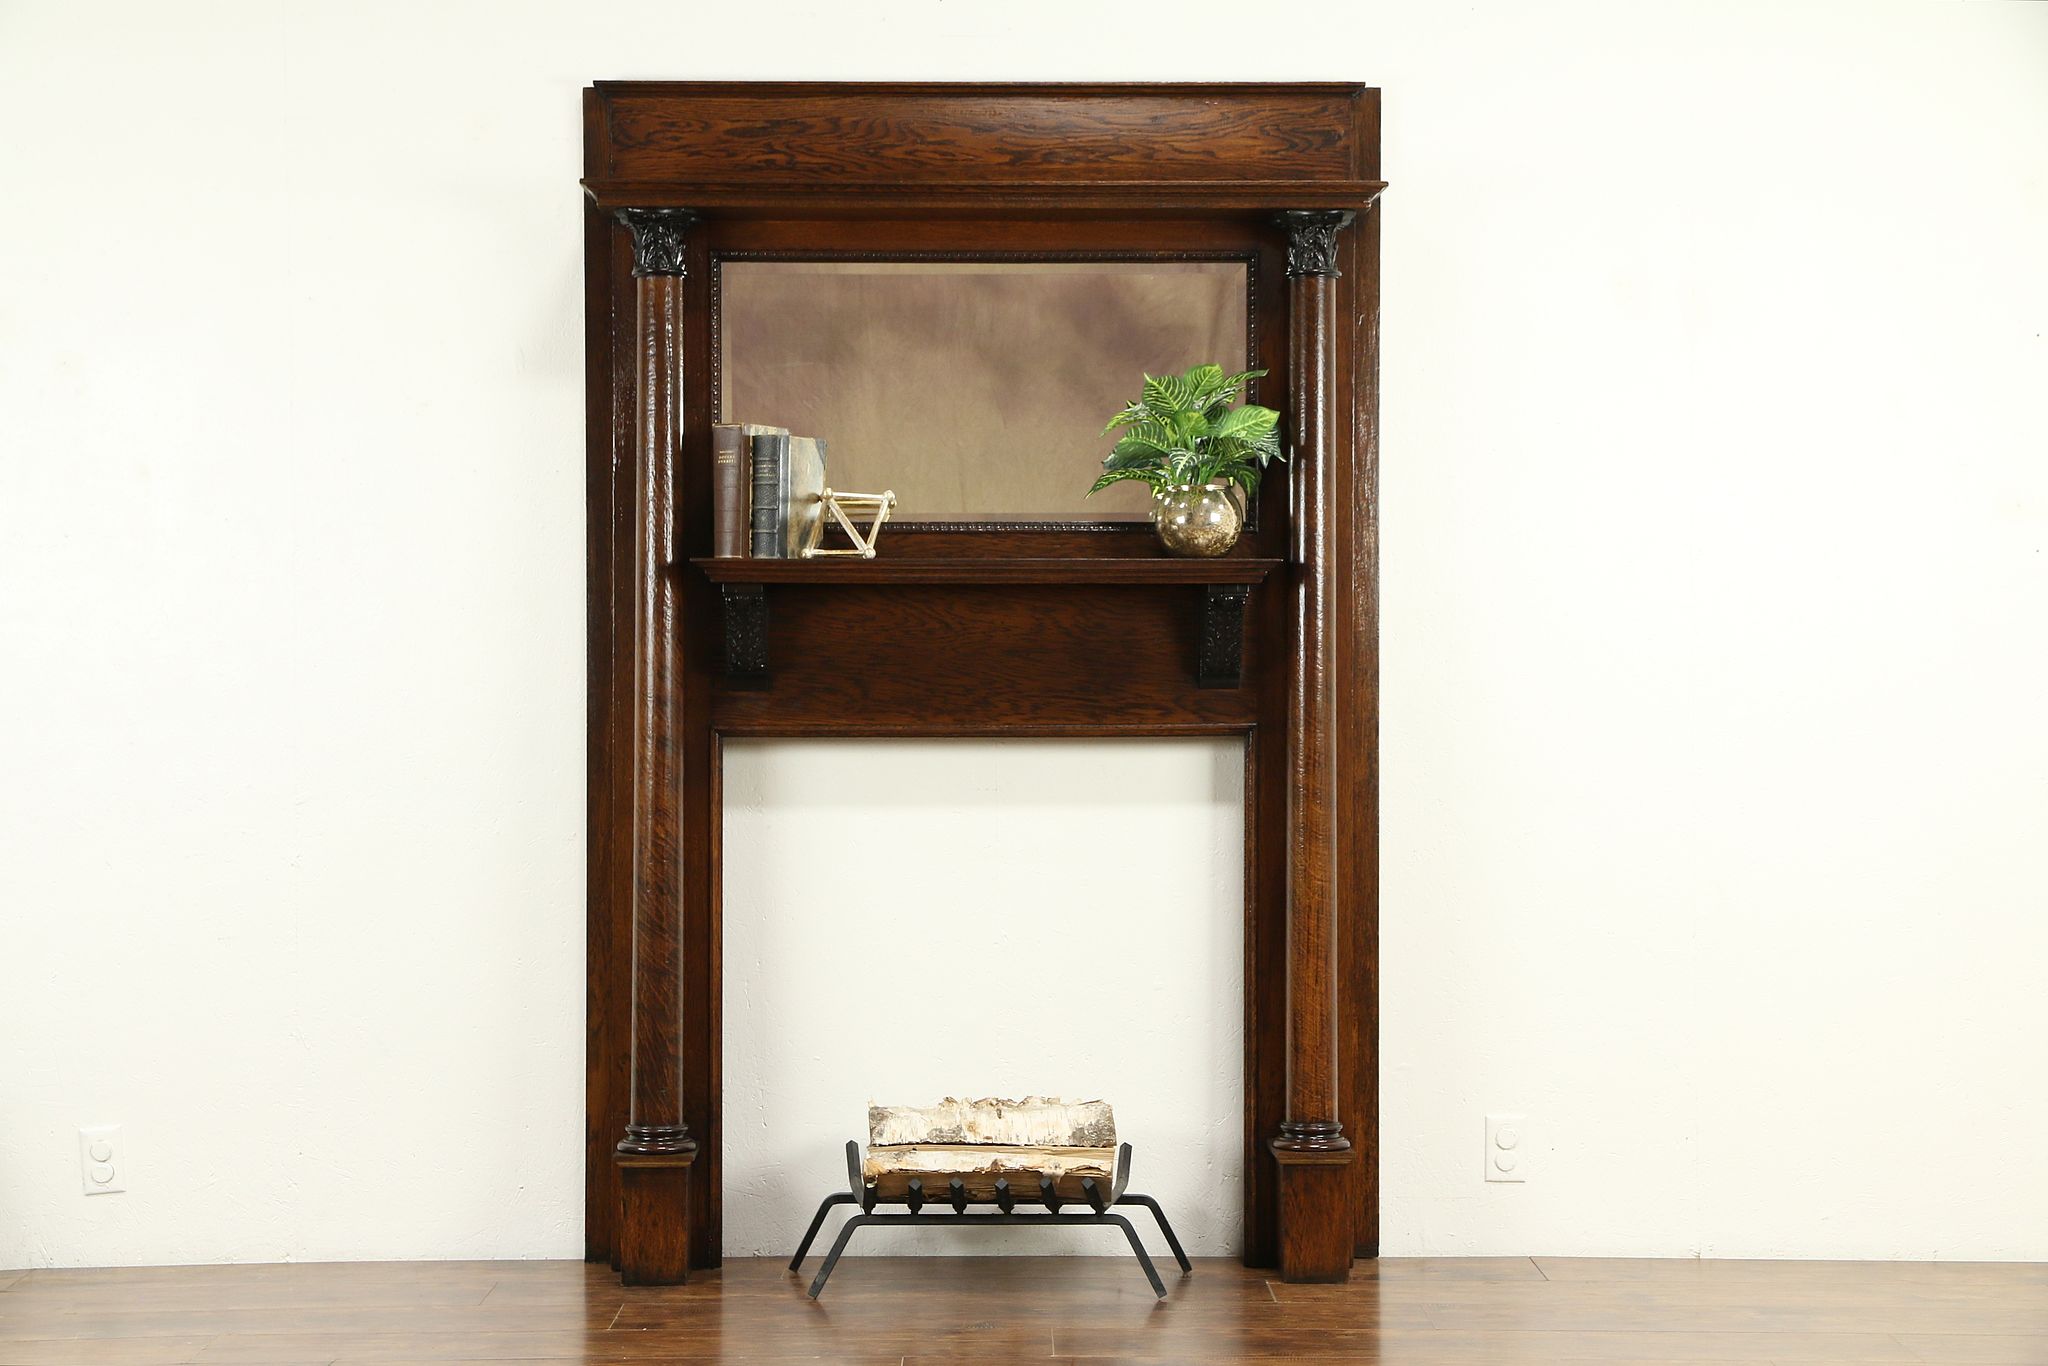 Sold Oak Antique Fireplace Mantel, Antique Fireplace Surrounds With Mirror